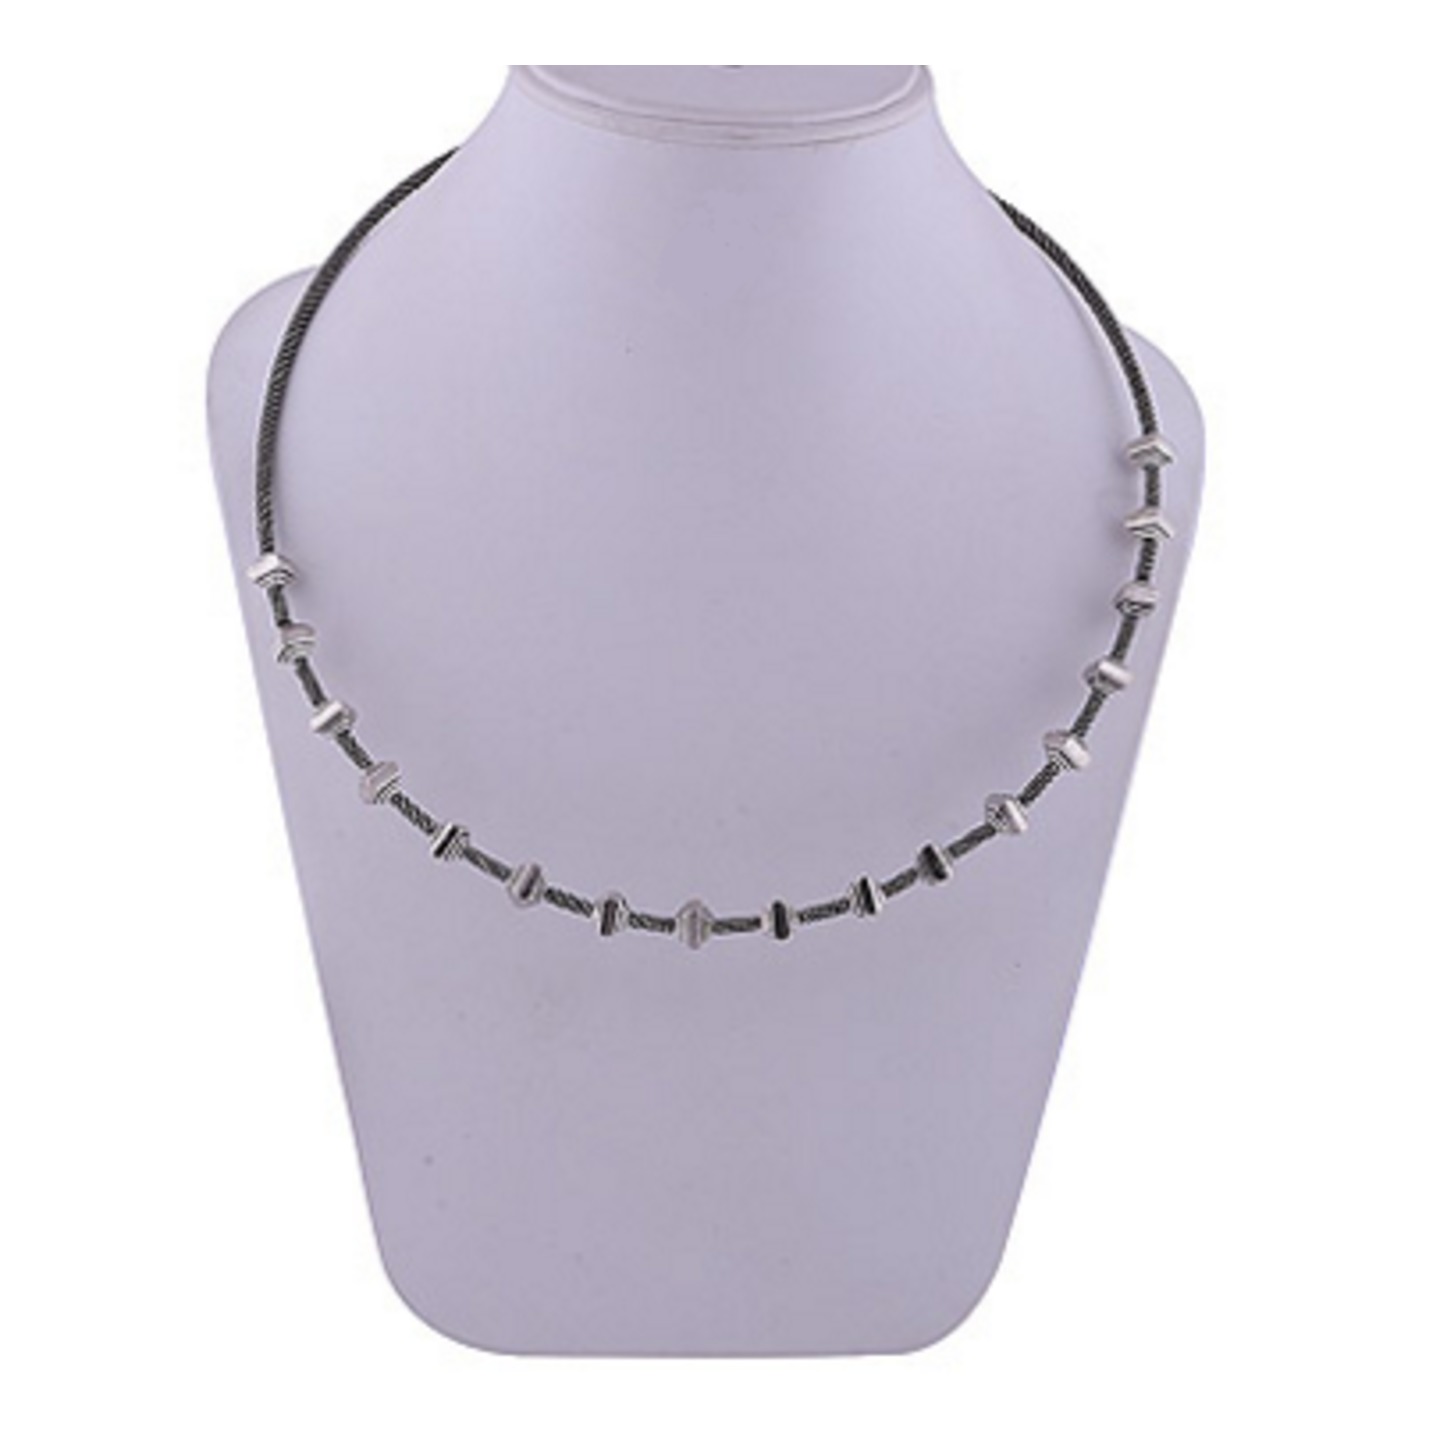 The Square Silver Necklace